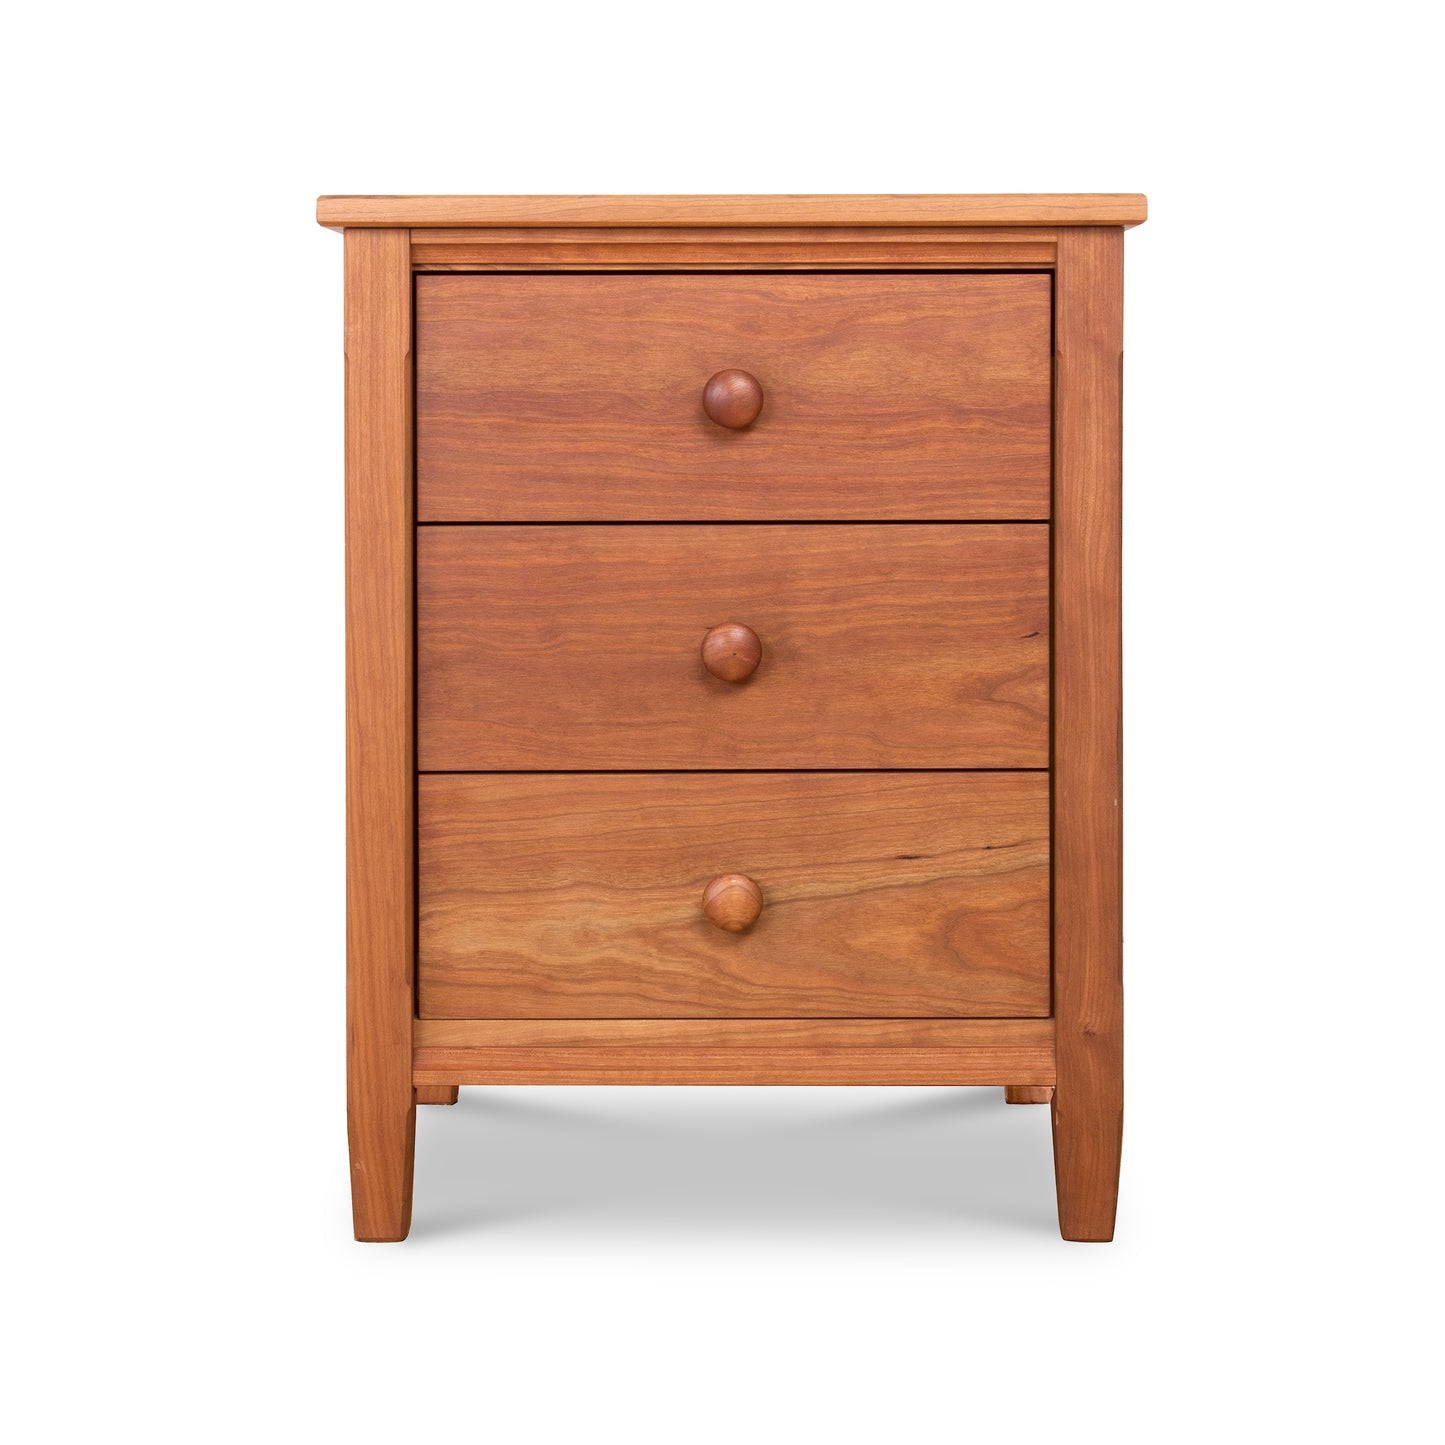 A wooden three-drawer Maple Corner Woodworks Vermont Shaker Nightstand made of cherry wood, featuring round knobs and a simple, sturdy design. The table is isolated on a white background.